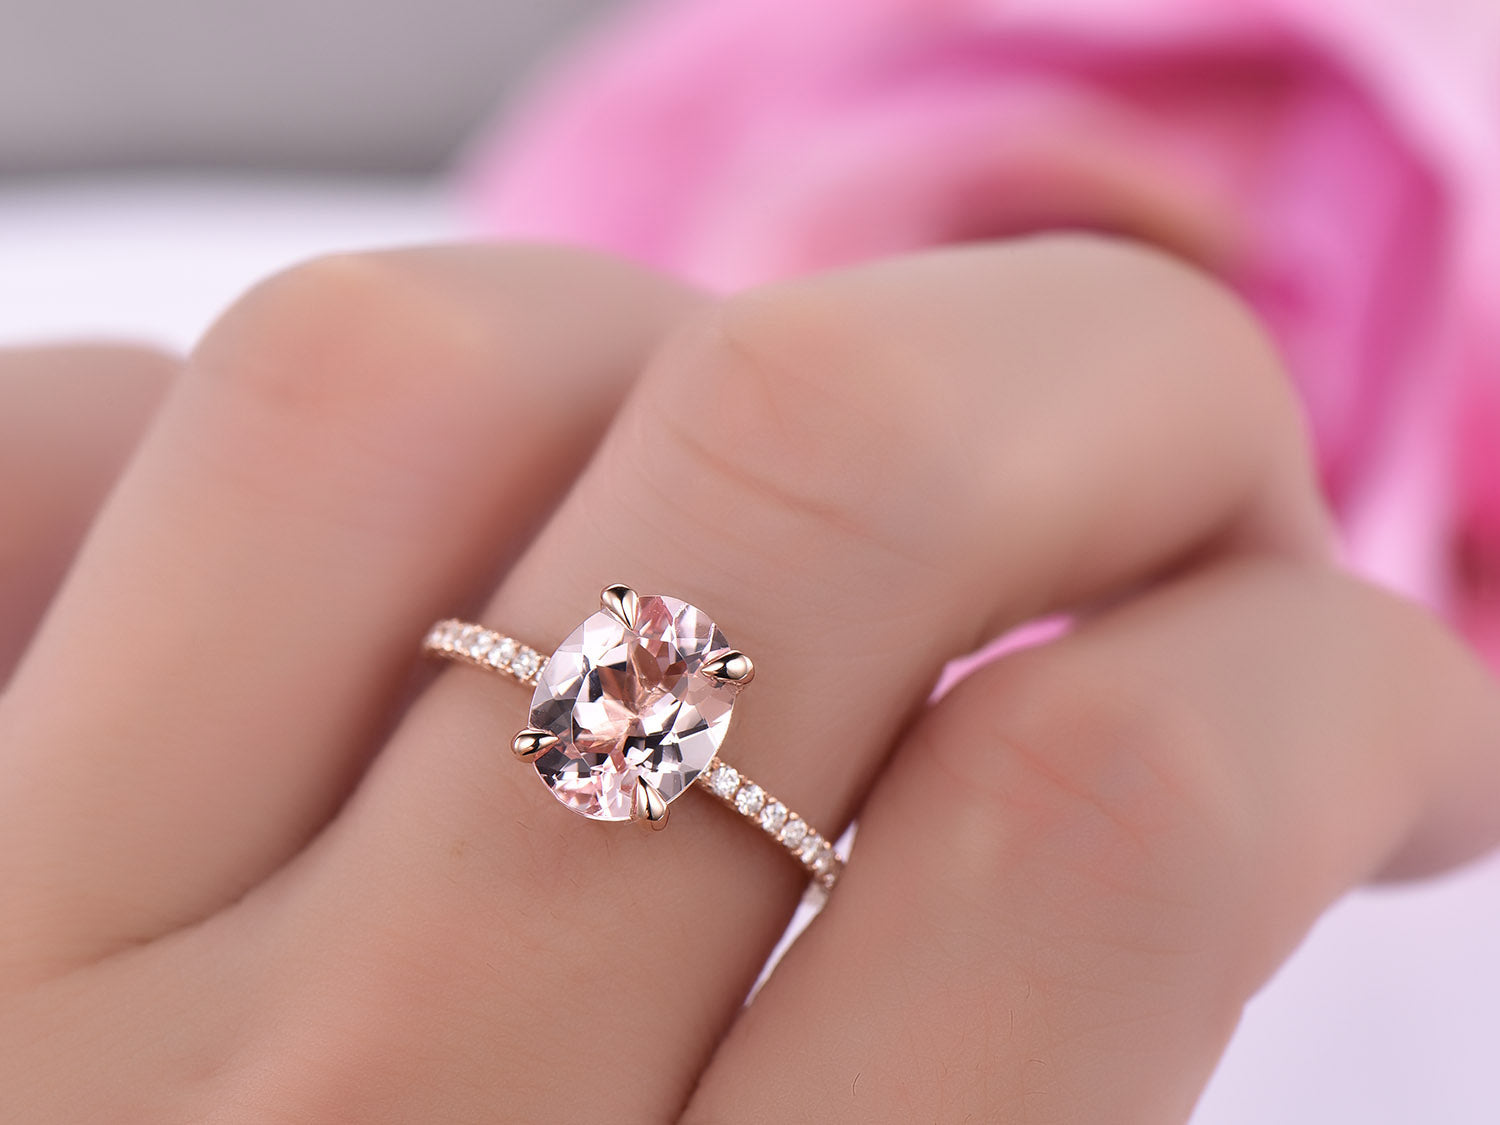 Reserved for GY- Oval Pinkish Peach Morganite Ring Pave Diamond Shank 14K Rose Gold 8x10mm